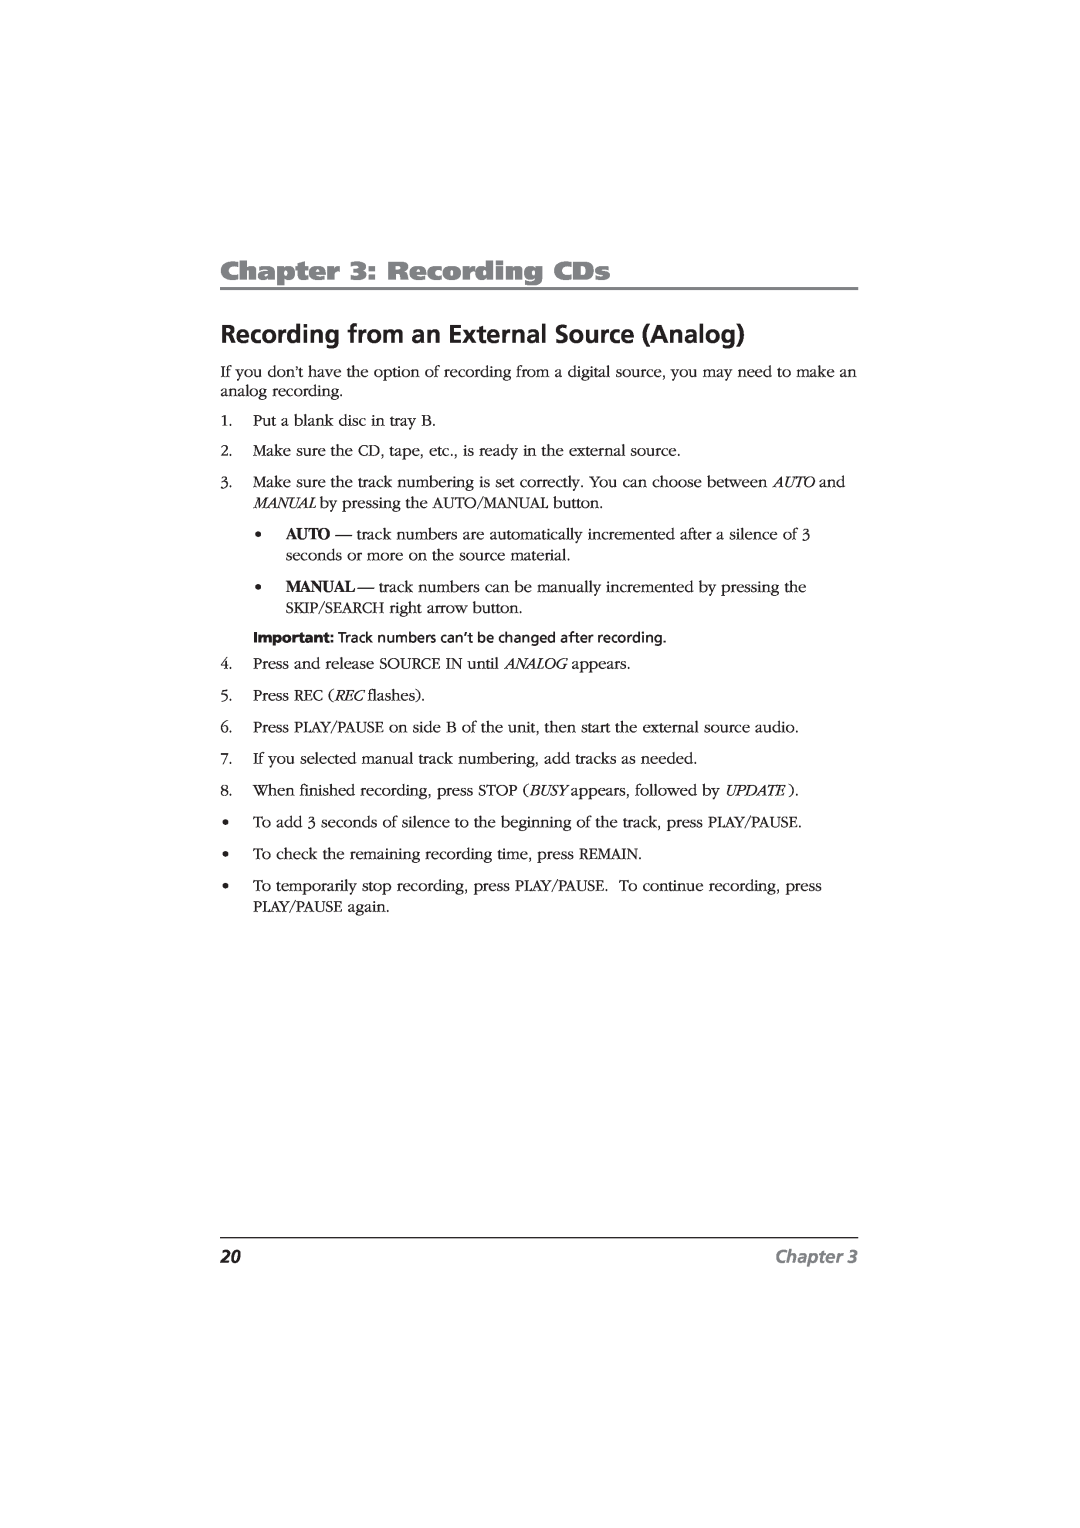 RCA CDRW10 manual Recording from an External Source Analog, Recording CDs, Chapter 